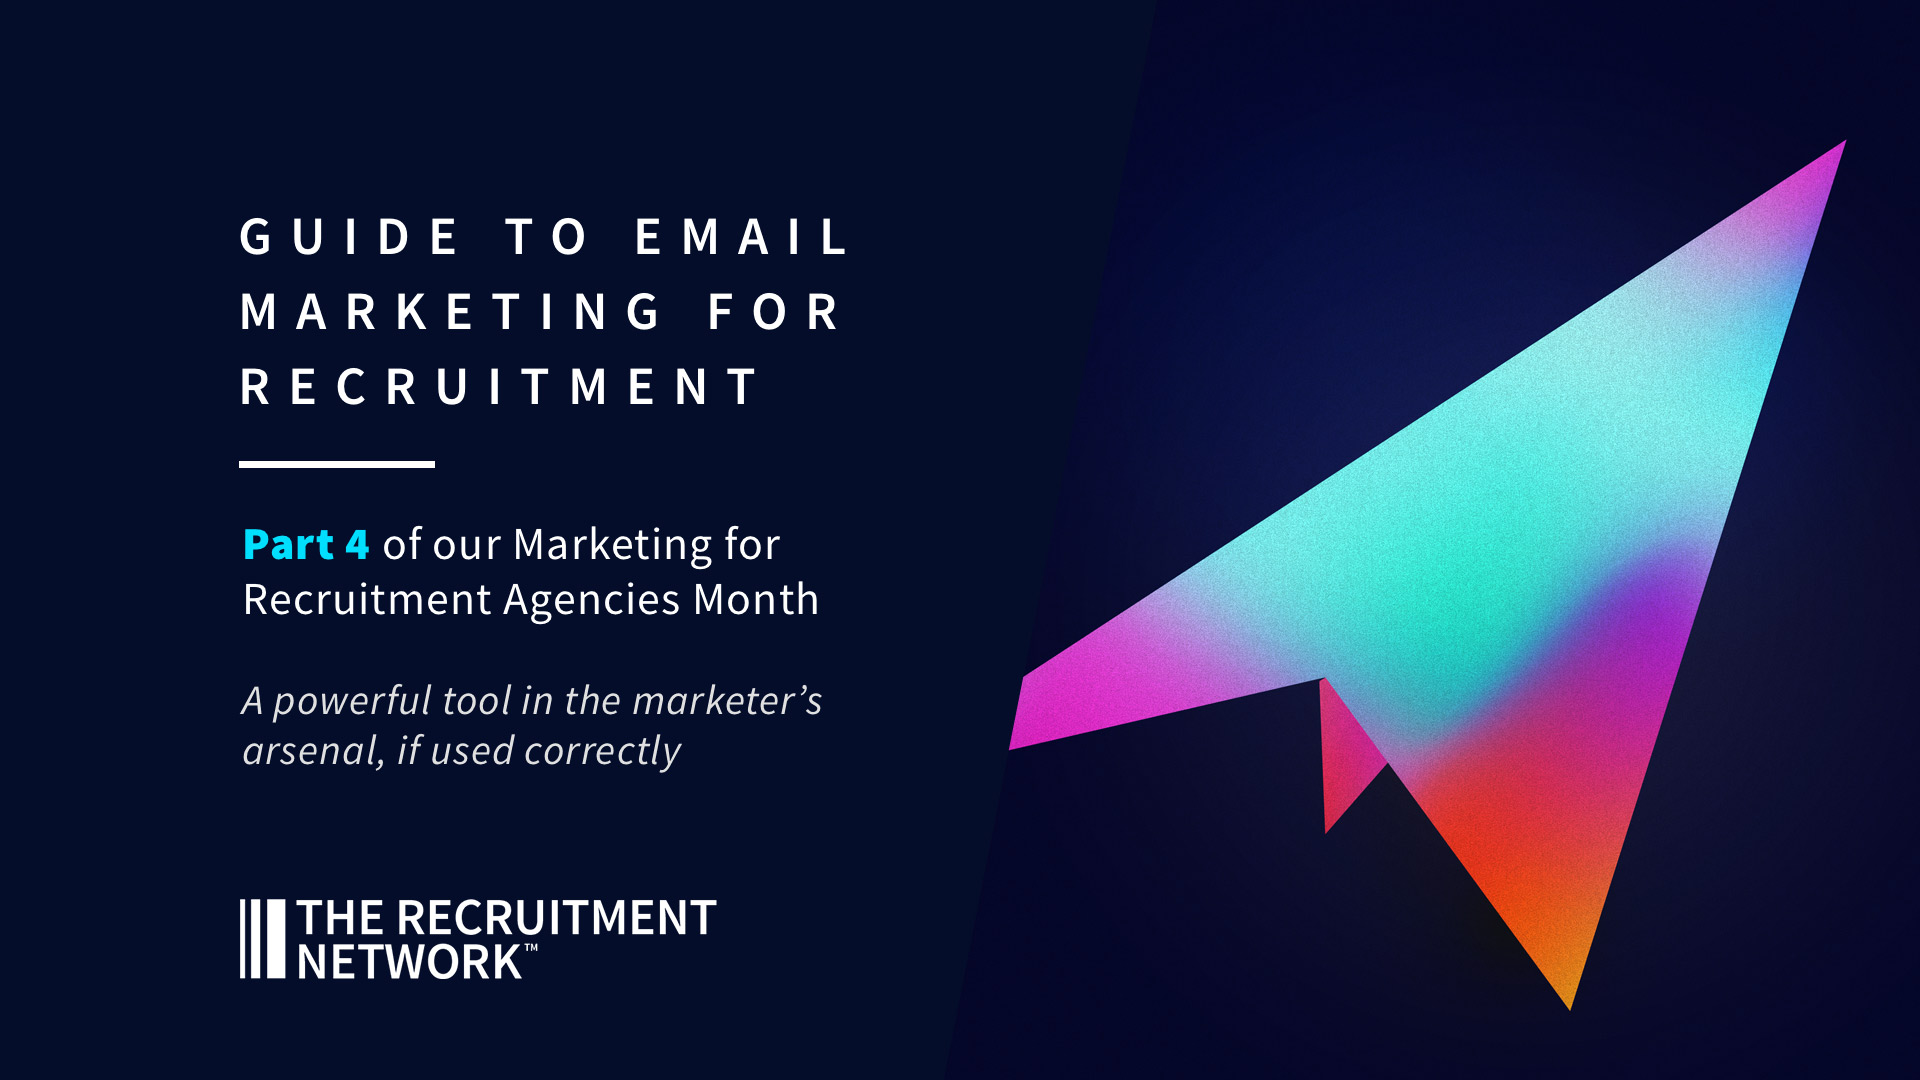 Guide to Email Marketing for Recruitment Agencies